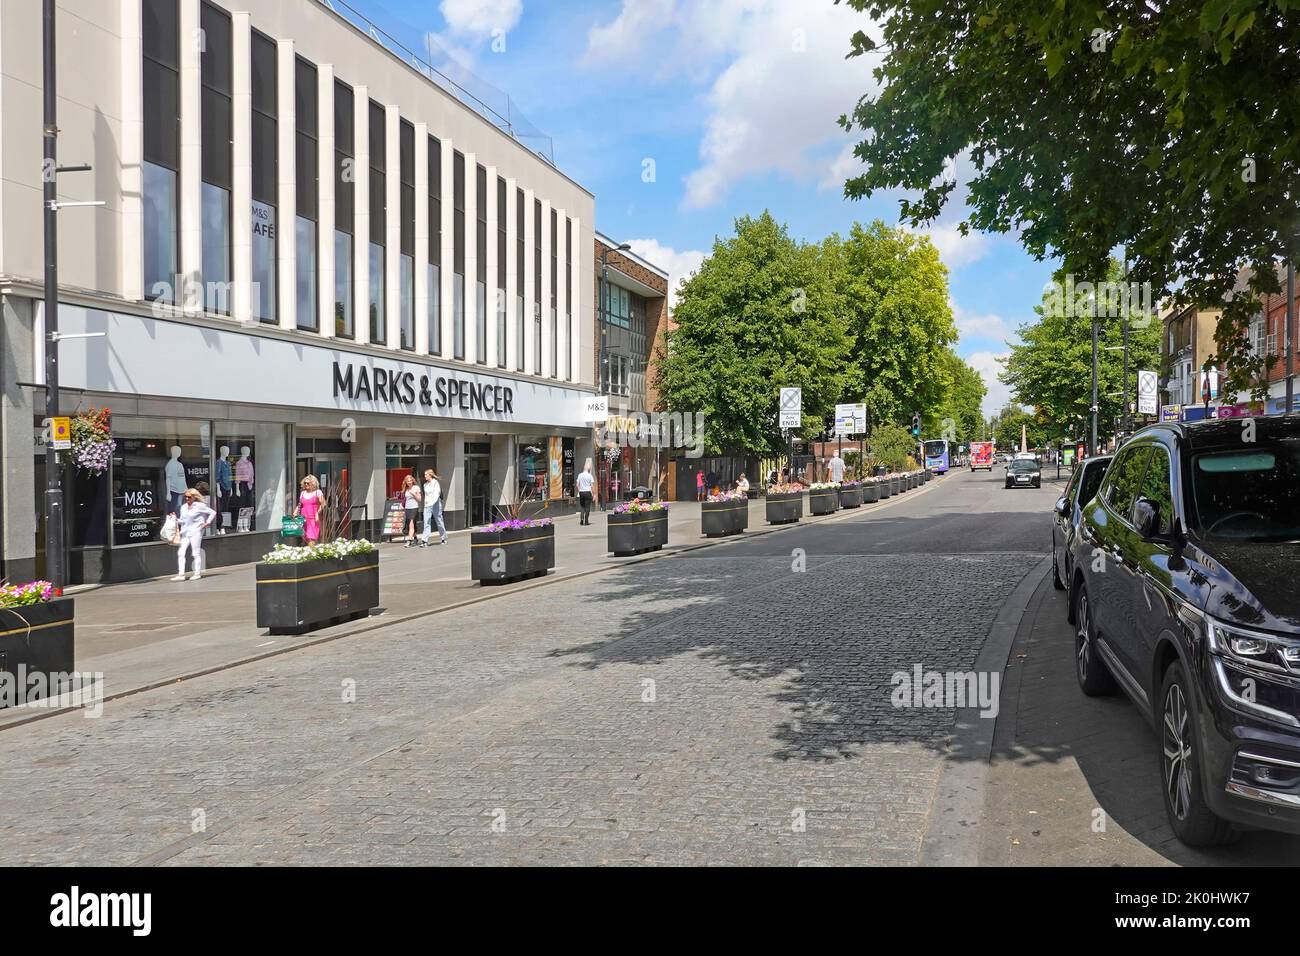 Brentwood cobbled shopping High Street with Marks & Spencer store cafe building façade summer planter boxes & on road car parking Essex England UK Stock Photo